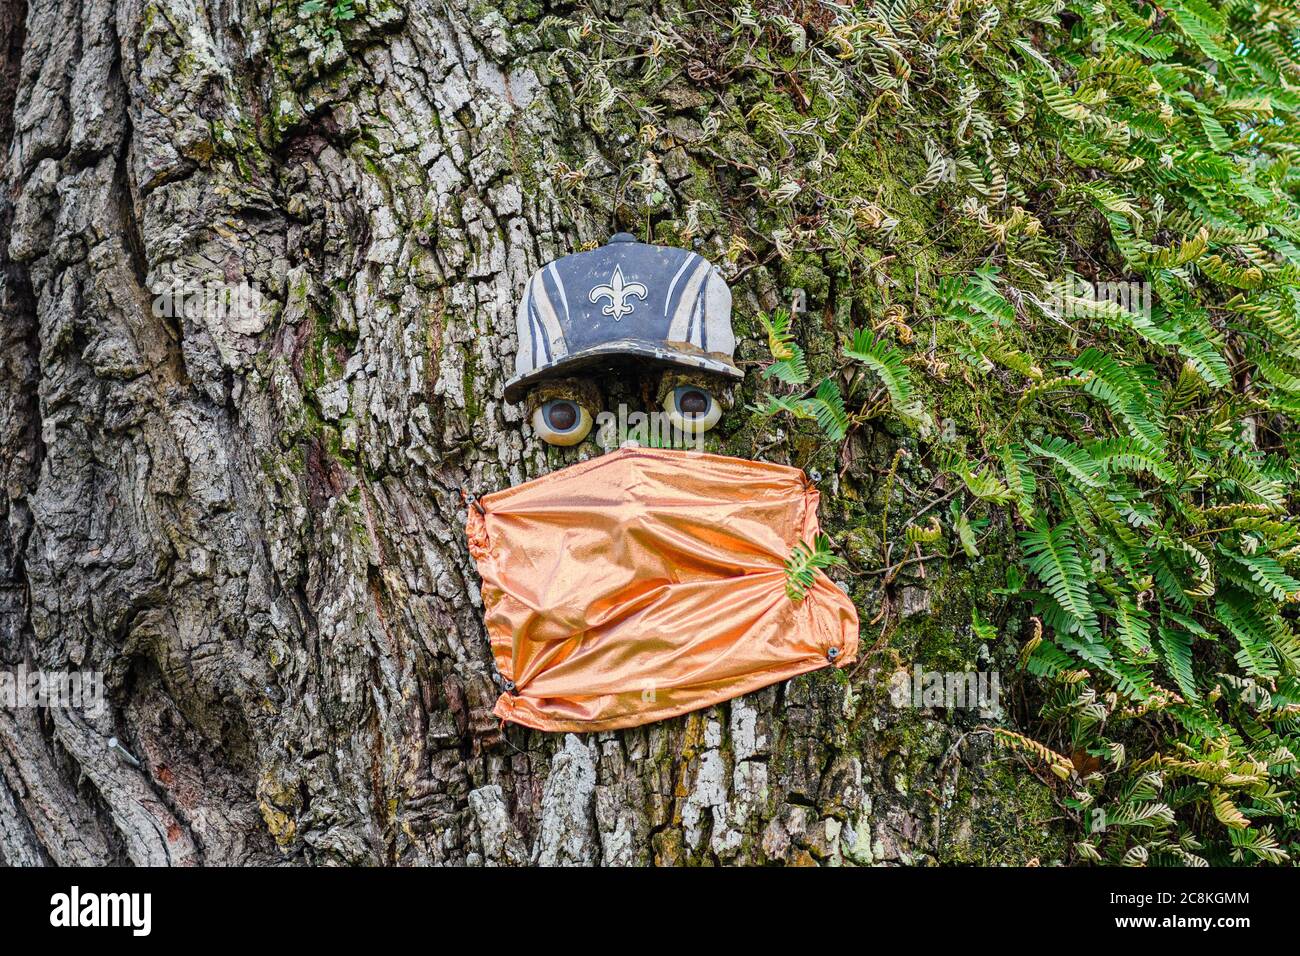 New Orleans, Louisiana/USA - 7/20/2020: Tree Decorated with Face, New Orleans Saints Cap and Face Mask Stock Photo